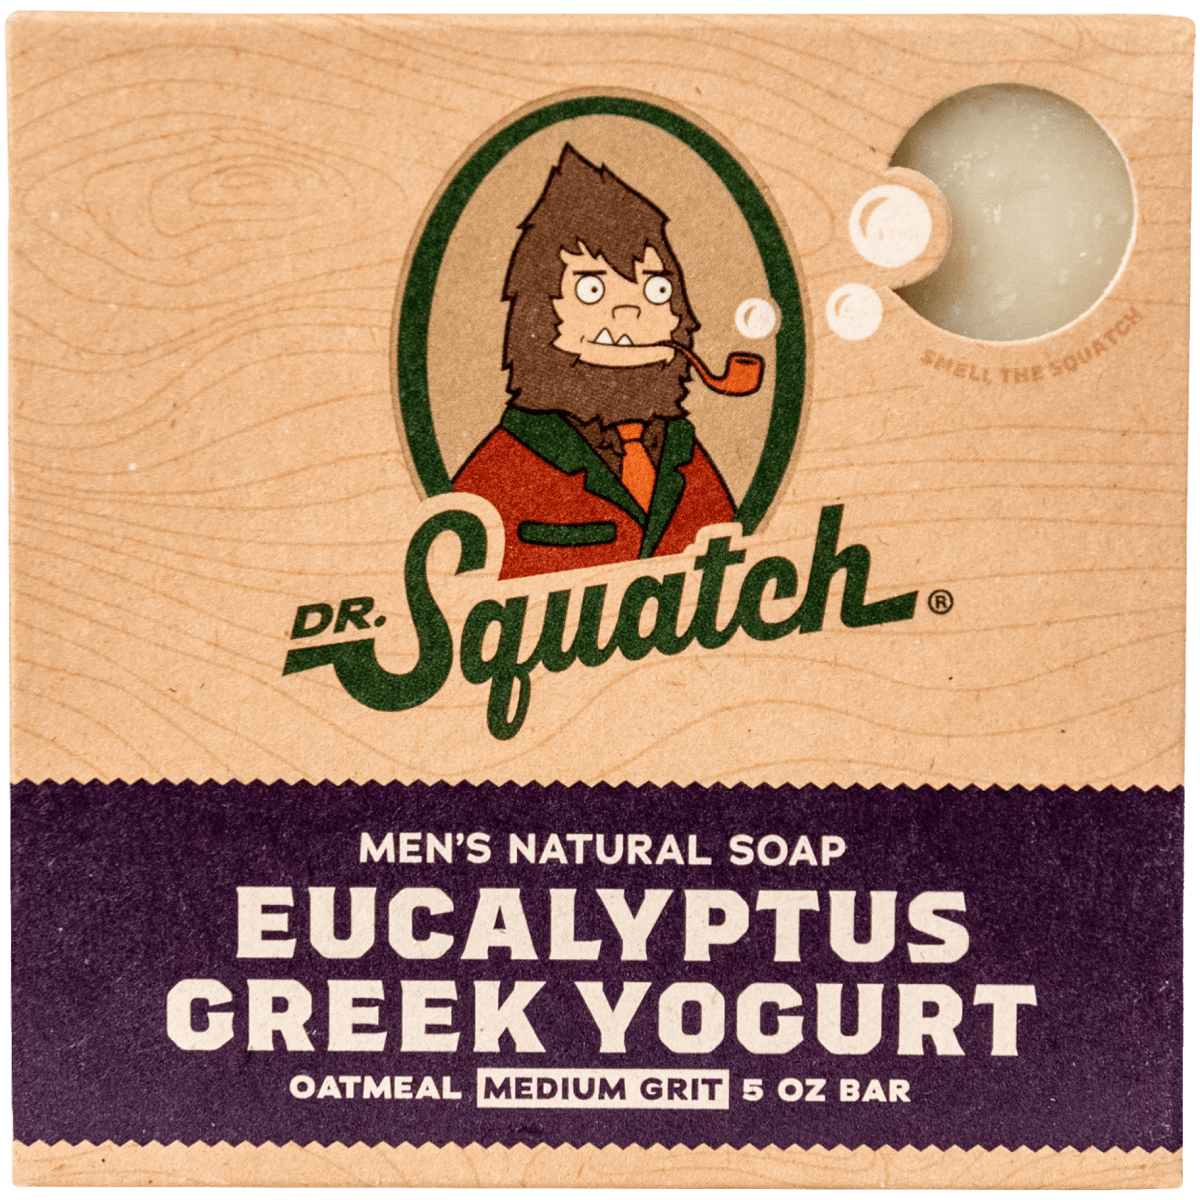 The Dr. Squatch Soap - Star Wars™ Collection 